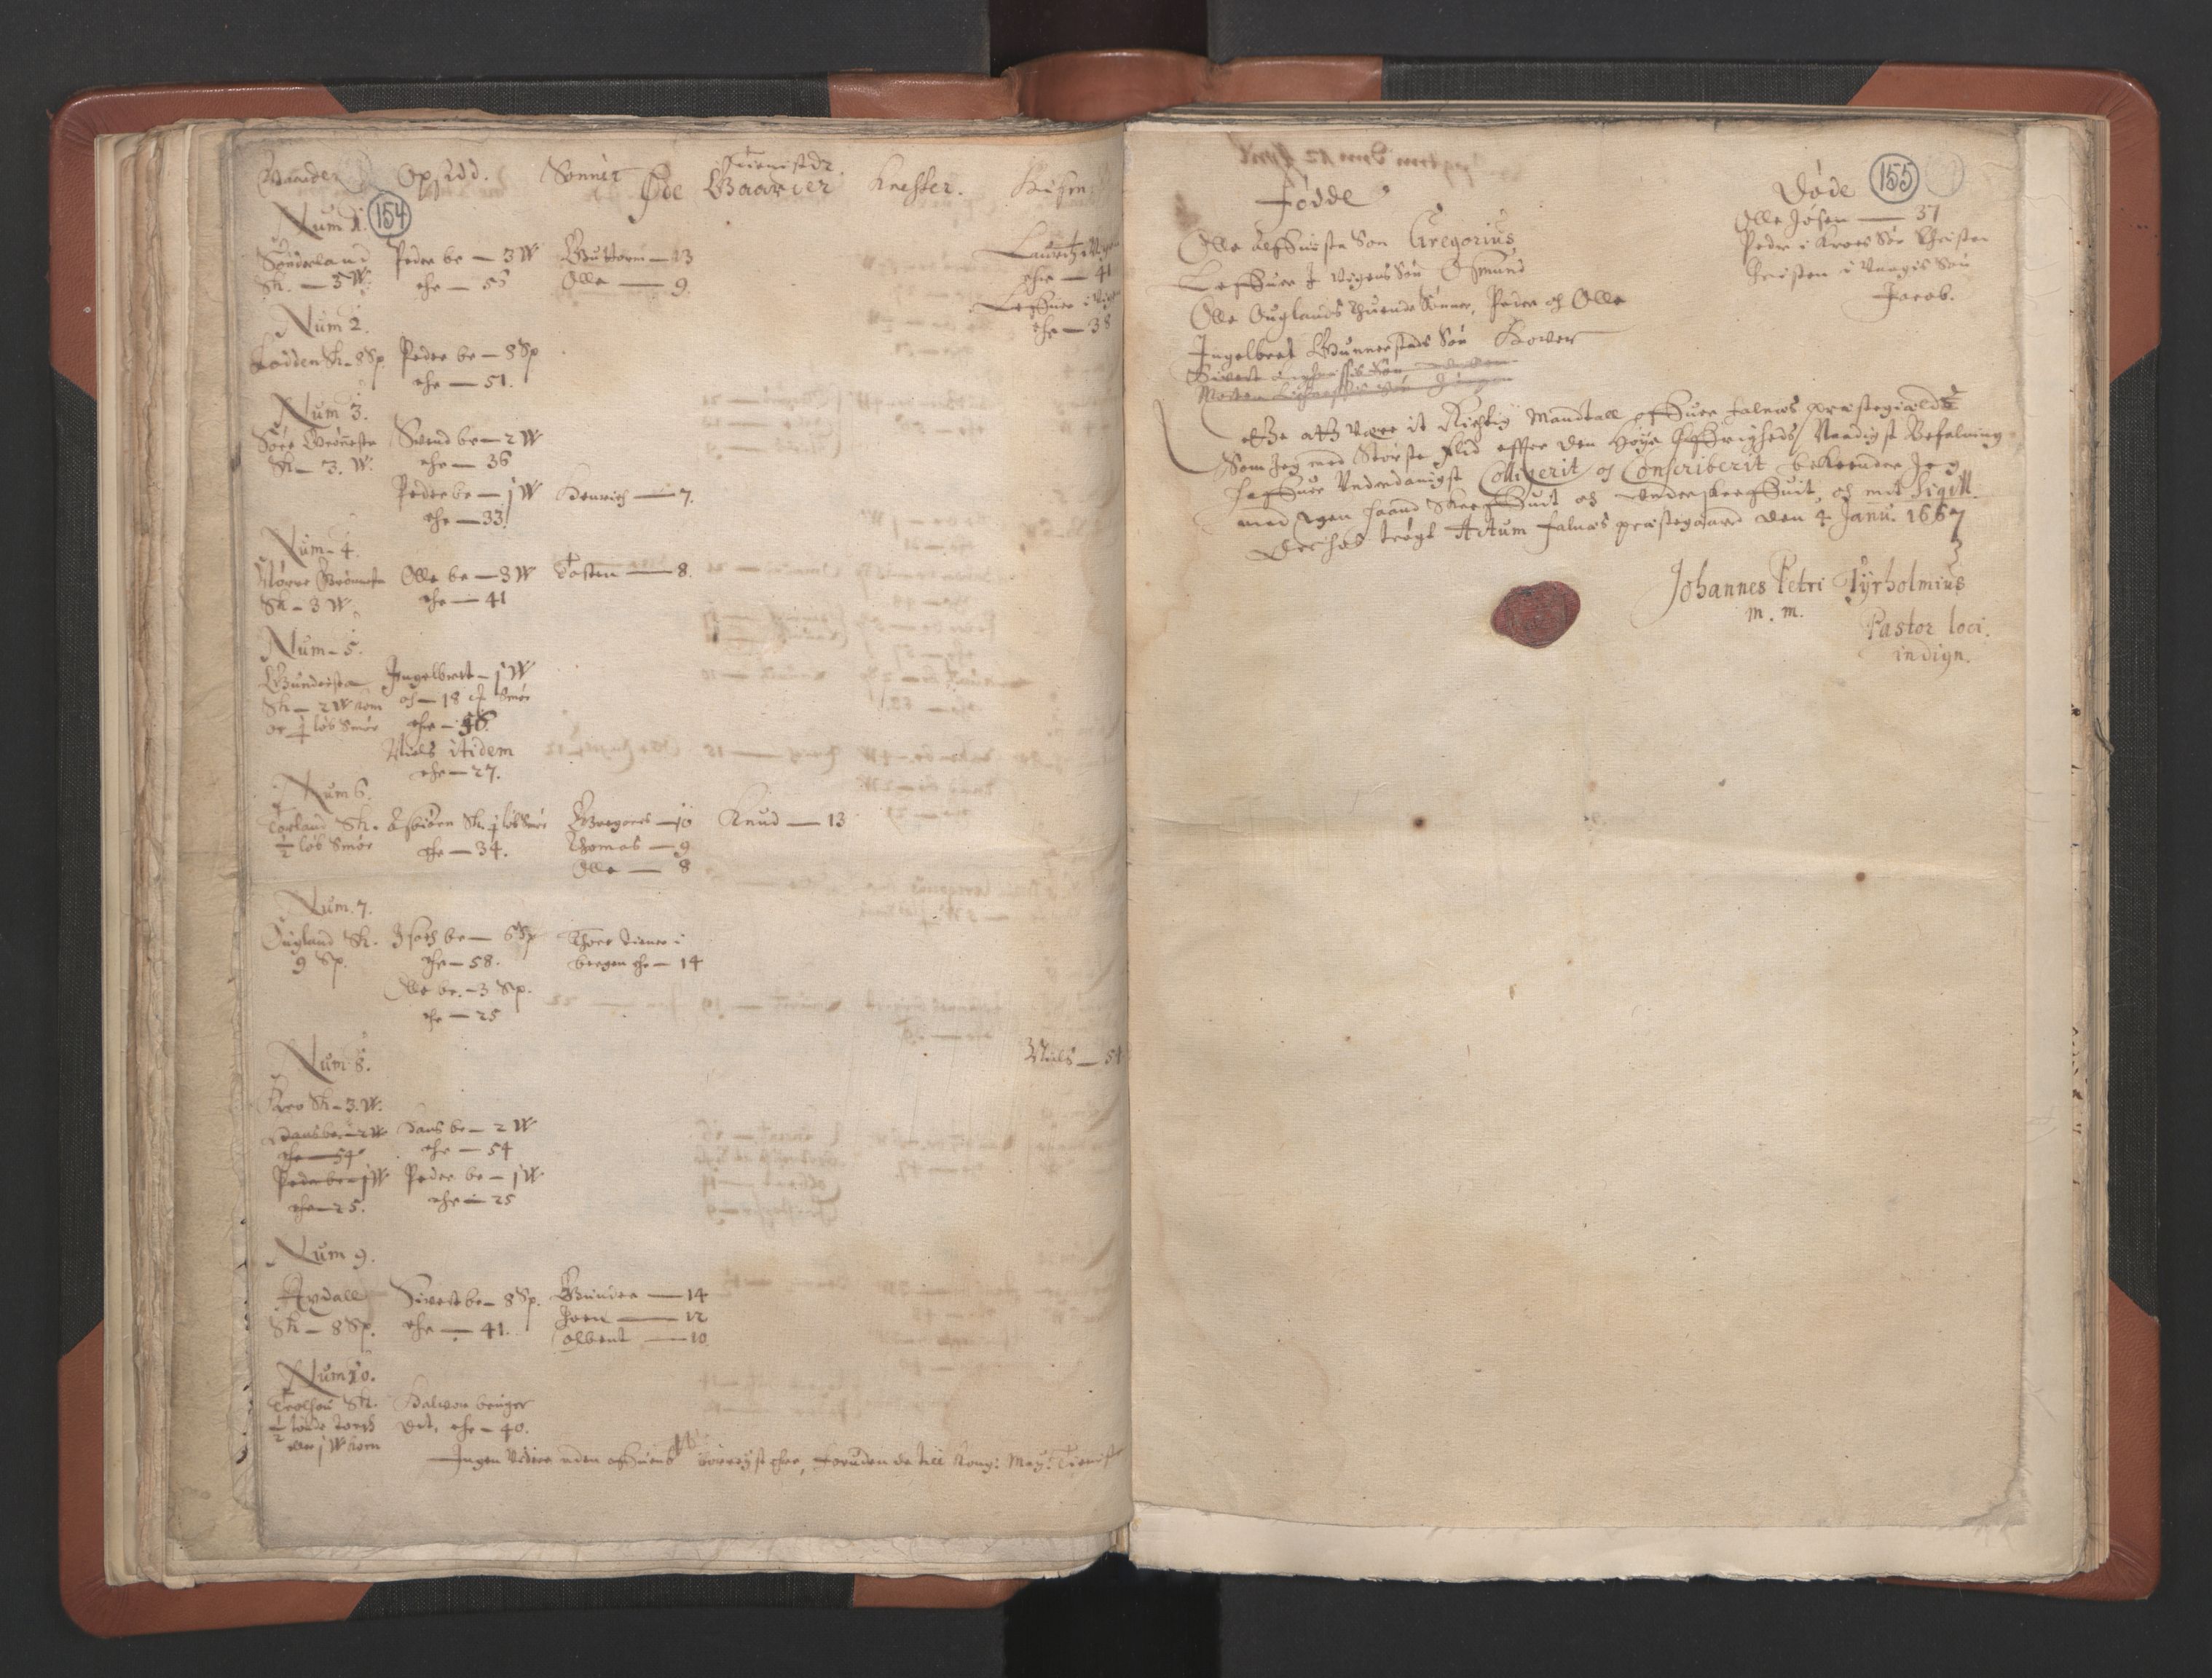 RA, Vicar's Census 1664-1666, no. 18: Stavanger deanery and Karmsund deanery, 1664-1666, p. 154-155